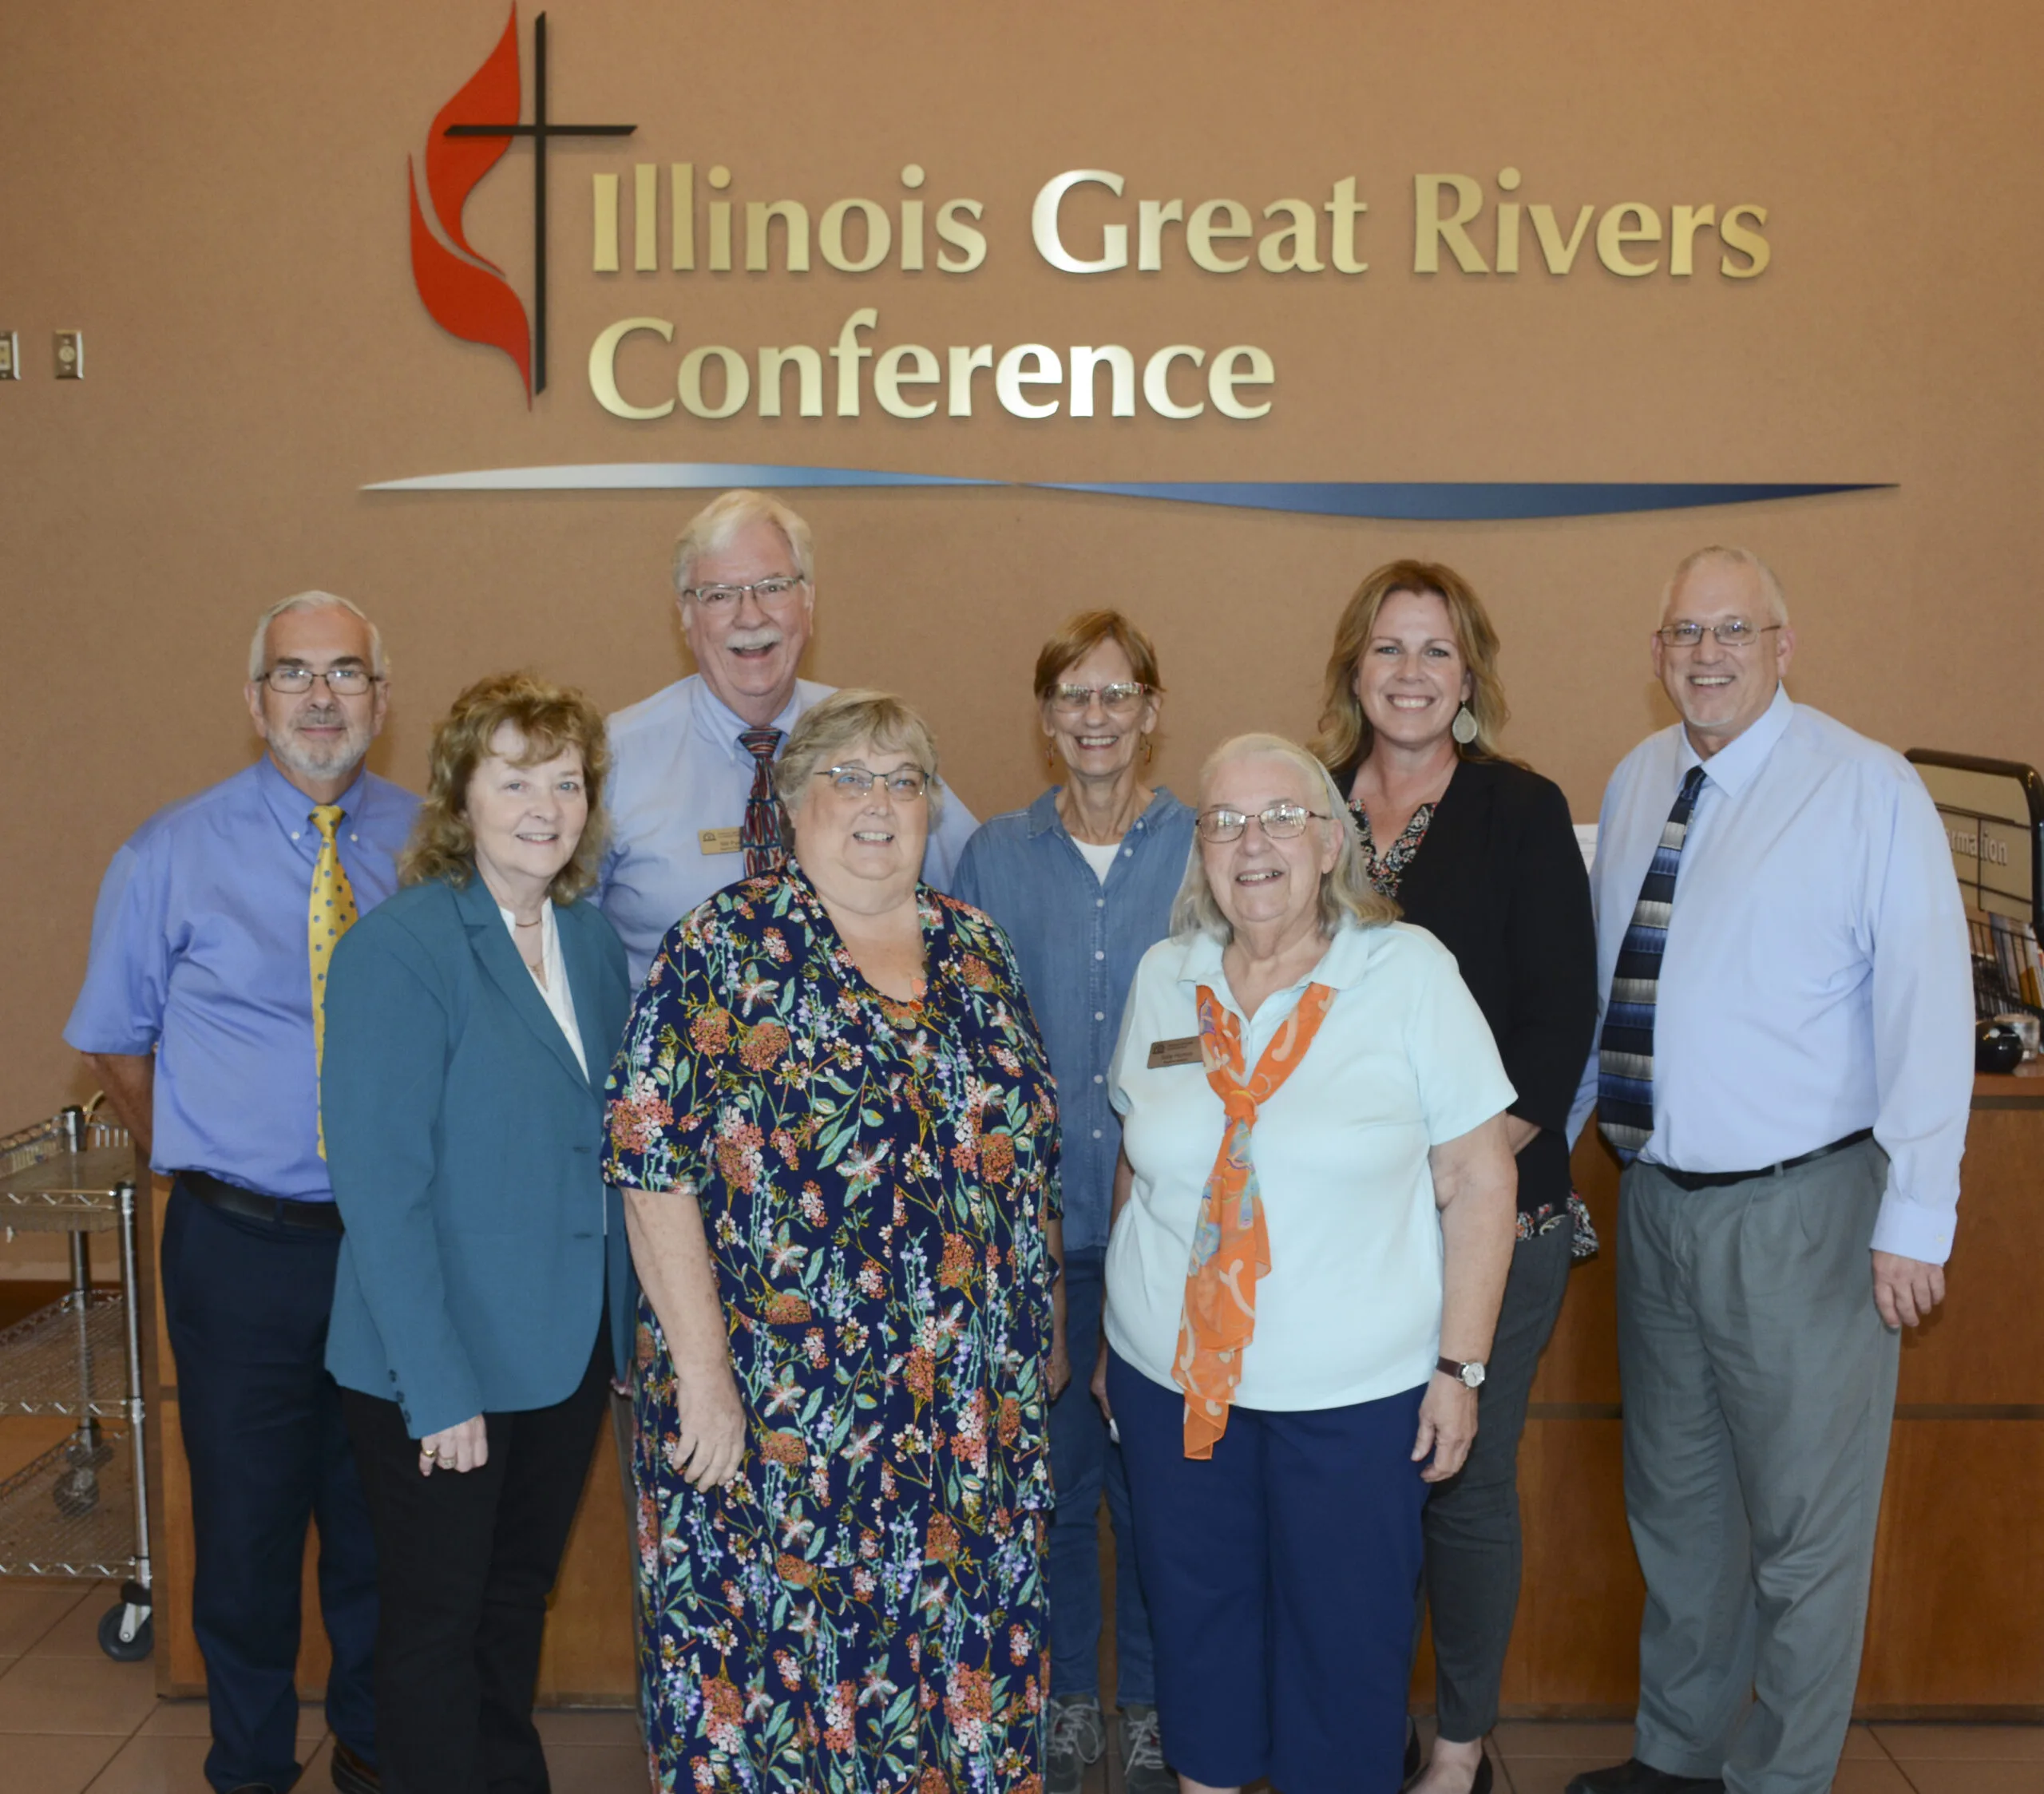 PASBF staff picture at the Illinois Great Rivers Conference